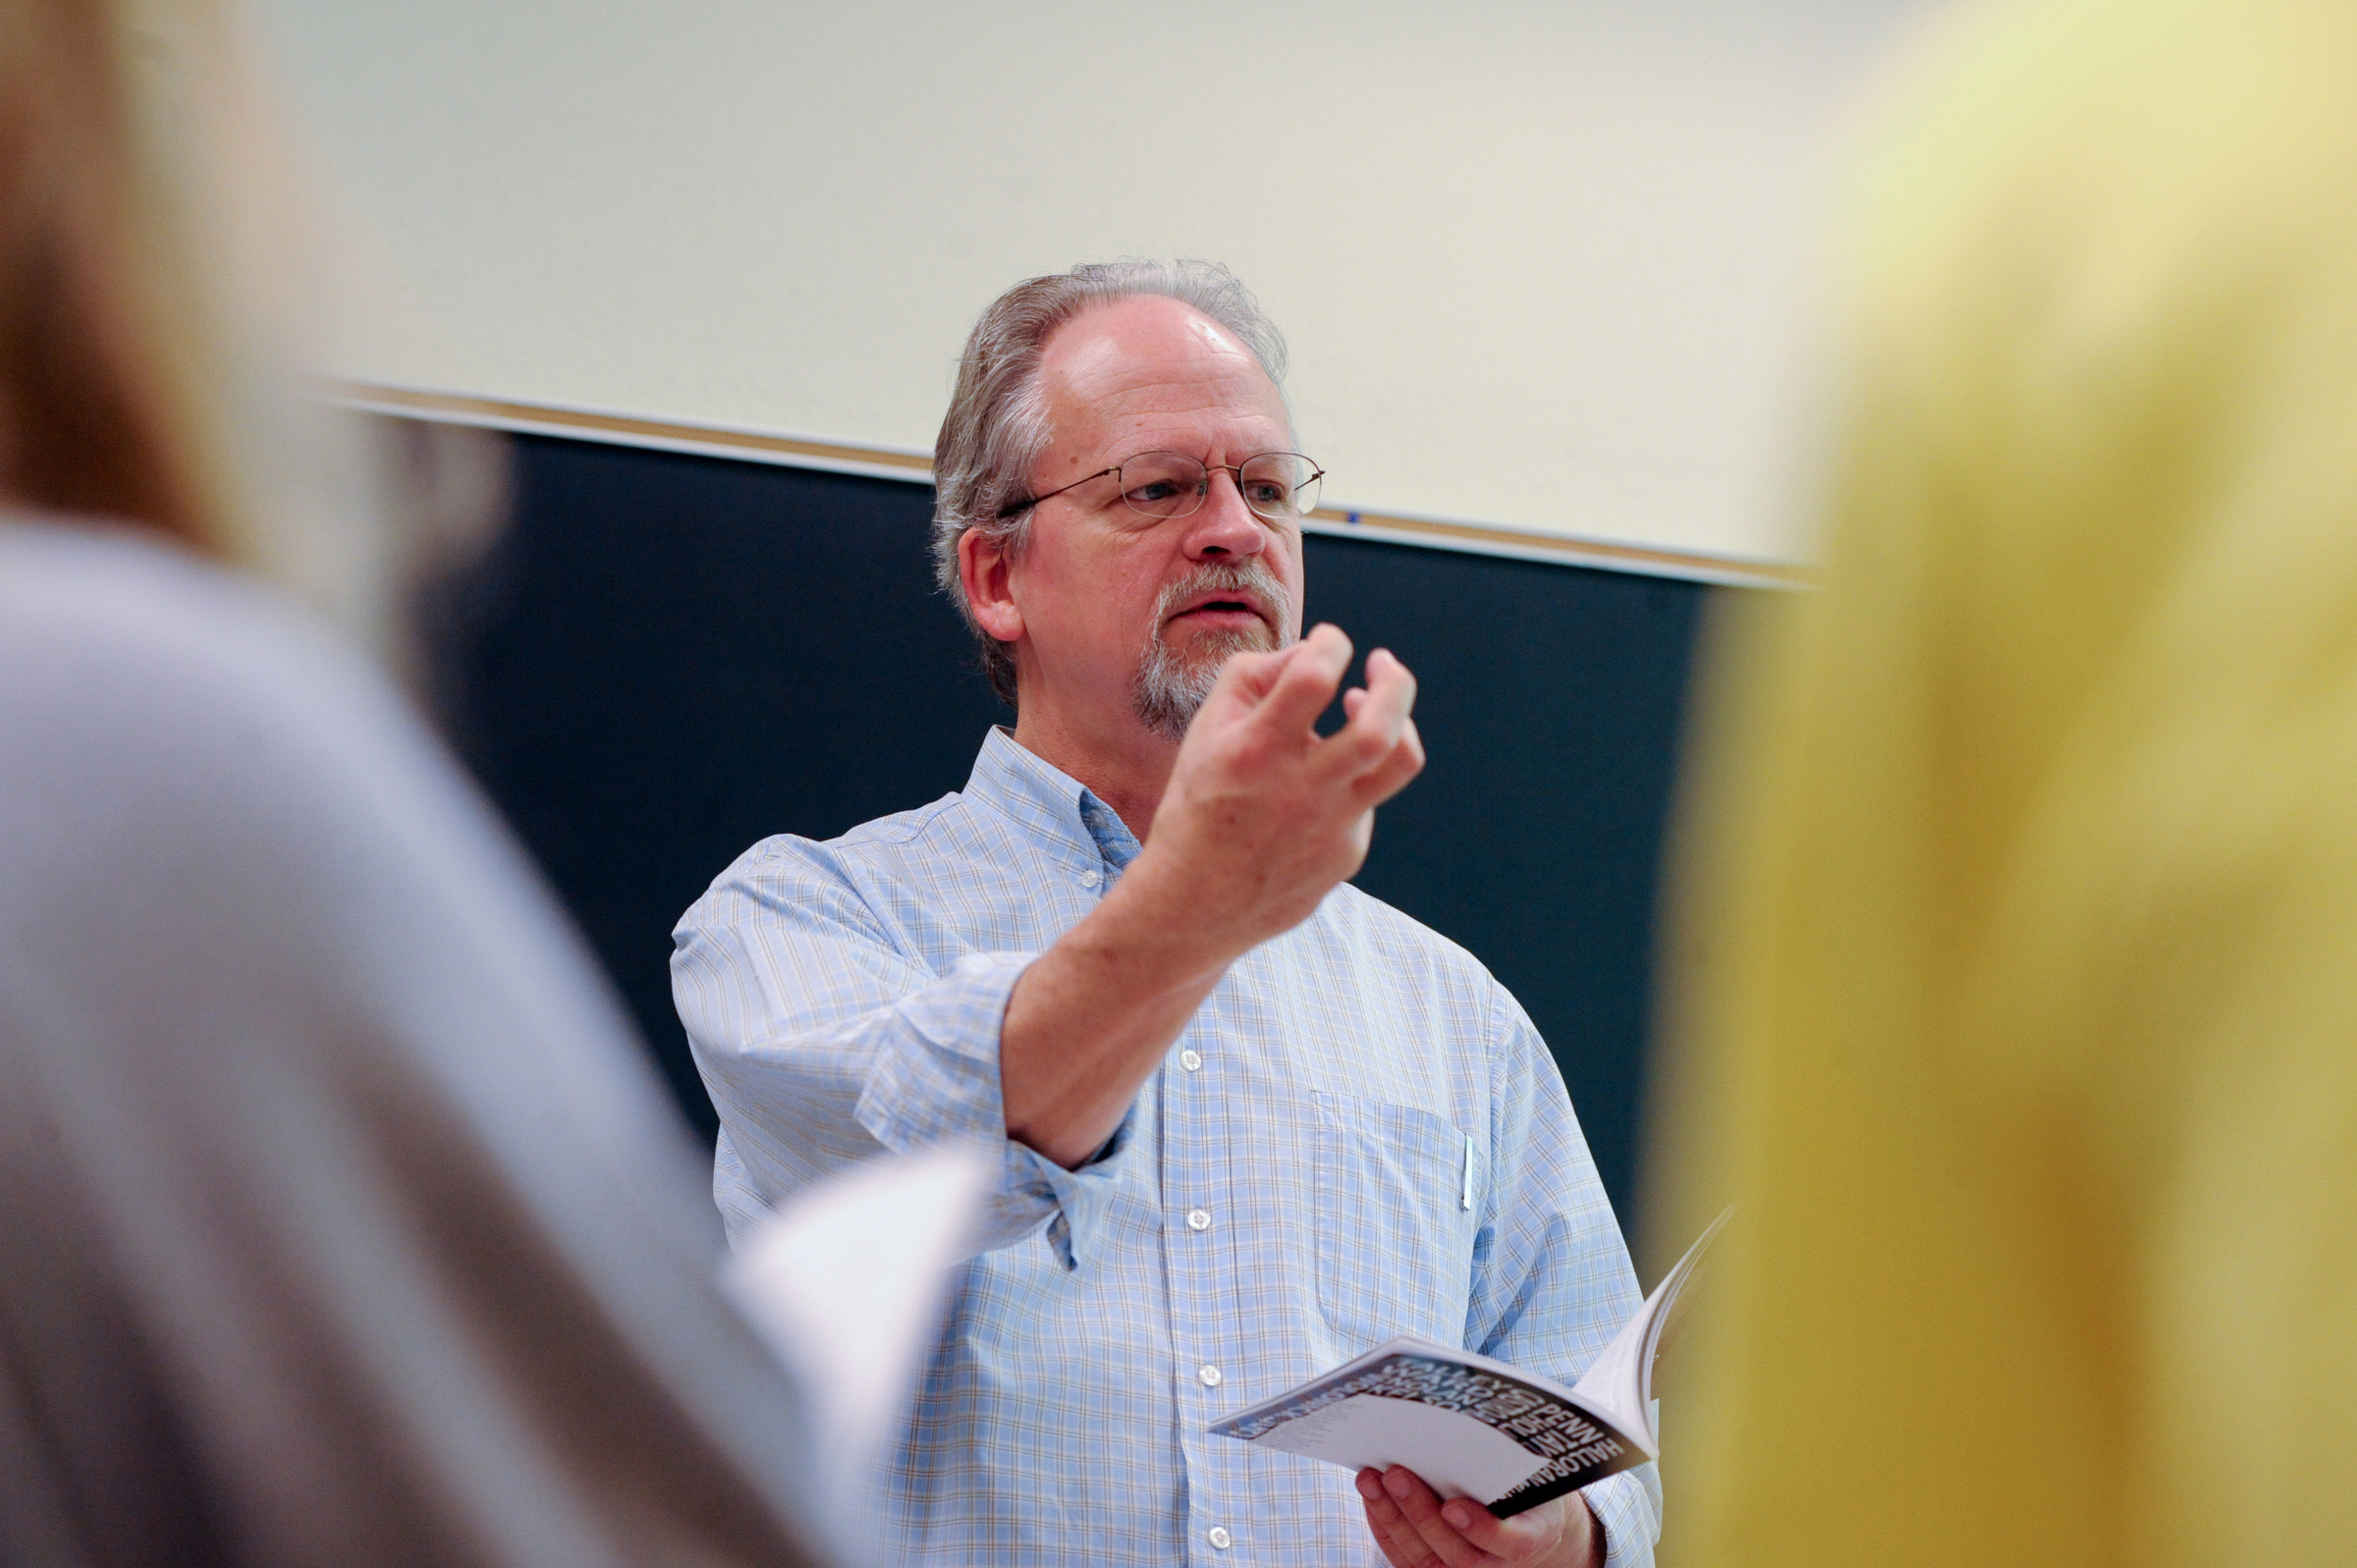 Michael McFee teaching a poetry class at the University of North Carolina at Chapel Hill.